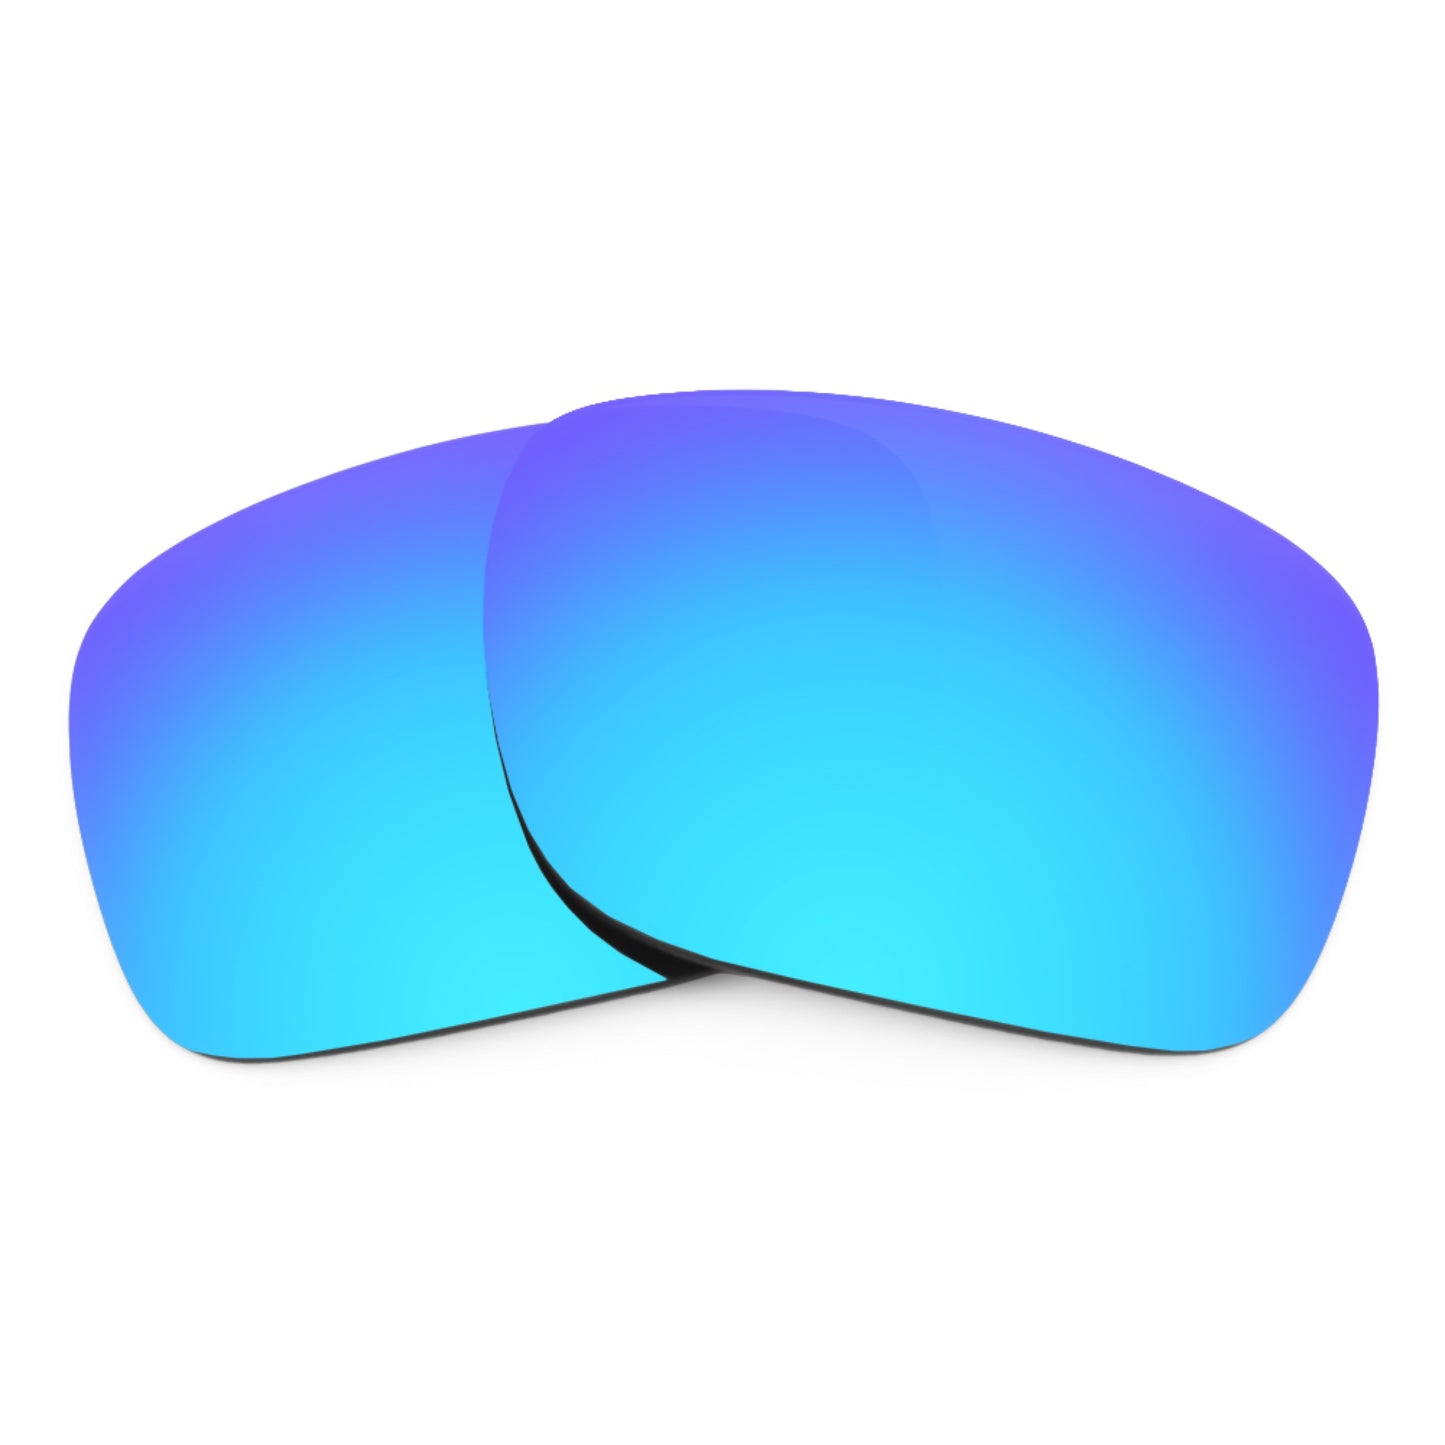 Revant replacement lenses for Ray-Ban New Caravan RB3636 58mm Non-Polarized Ice Blue